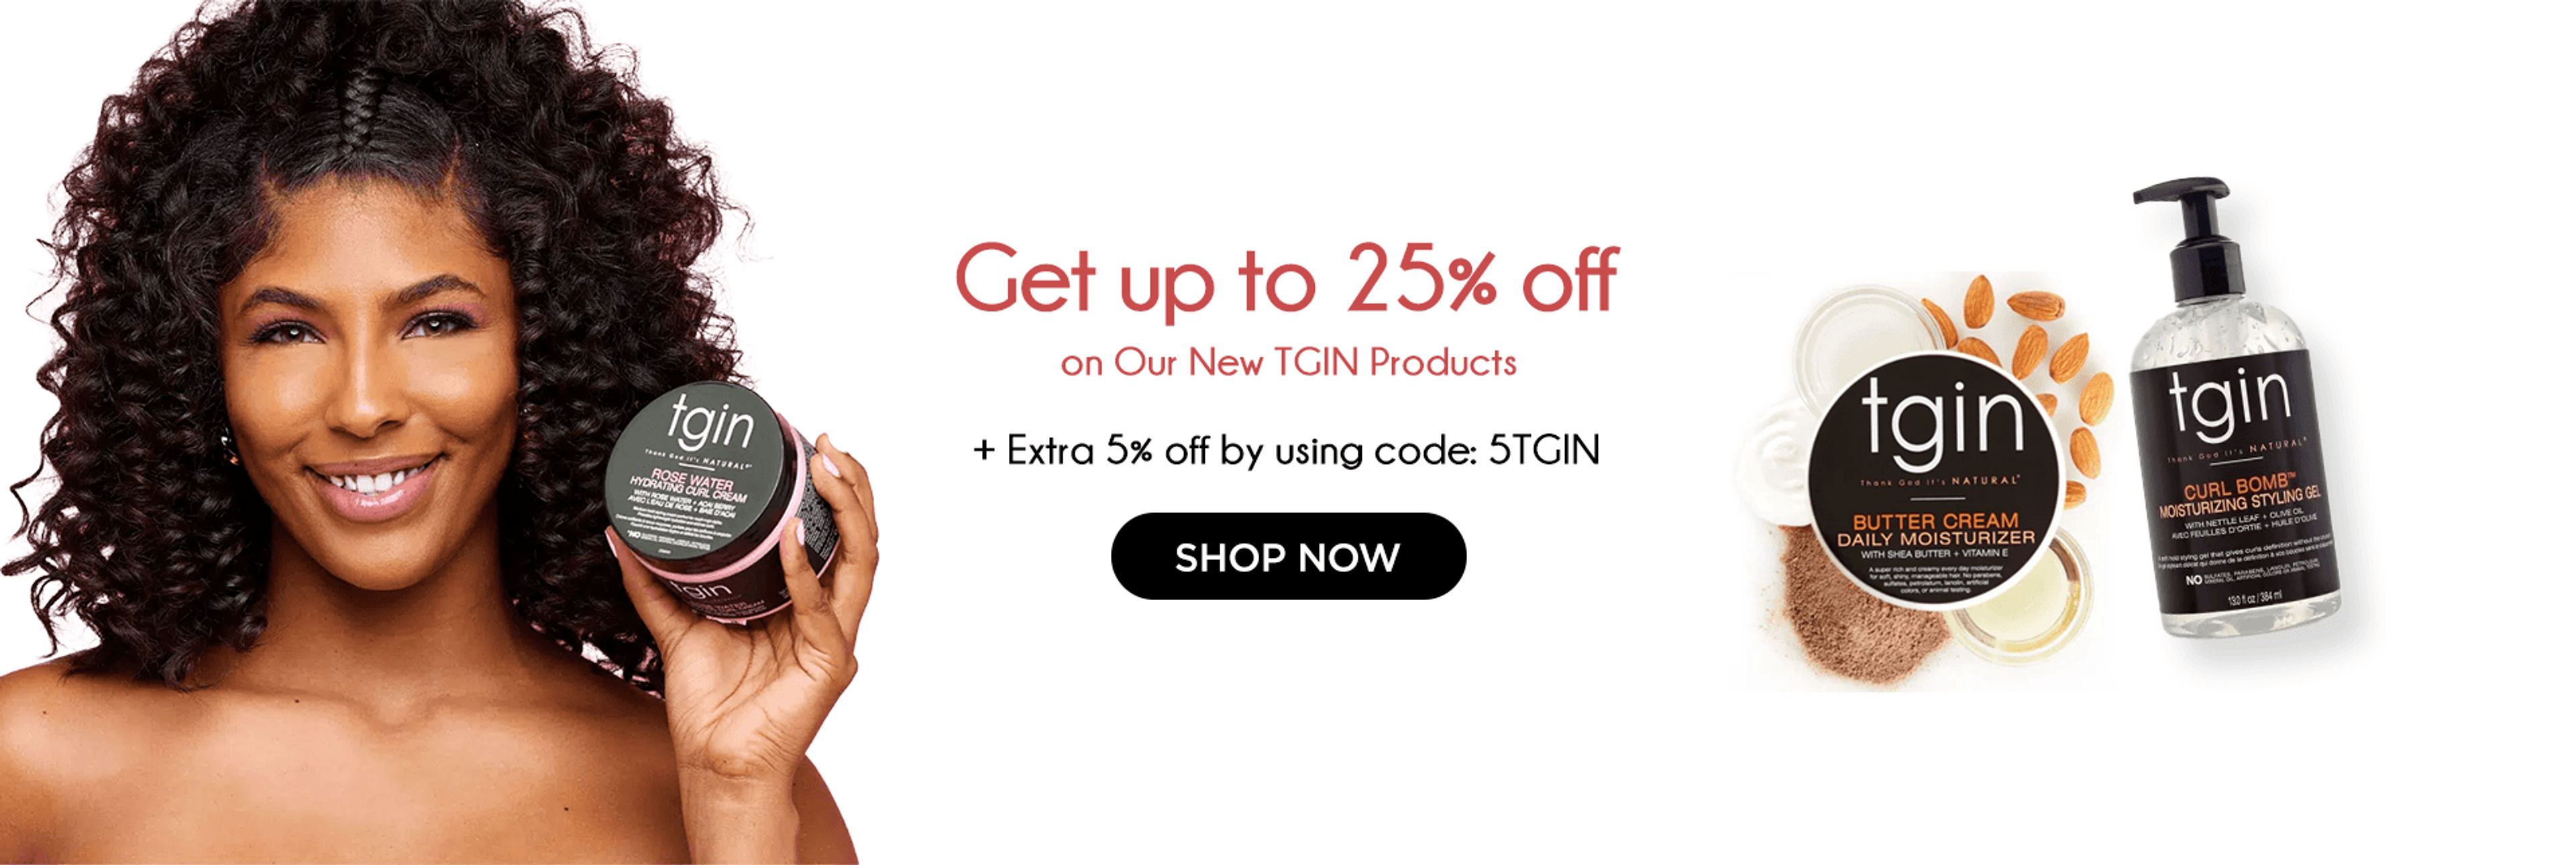 Get up to 25% off on Our New TGIN Products + Extra 5% off by using code